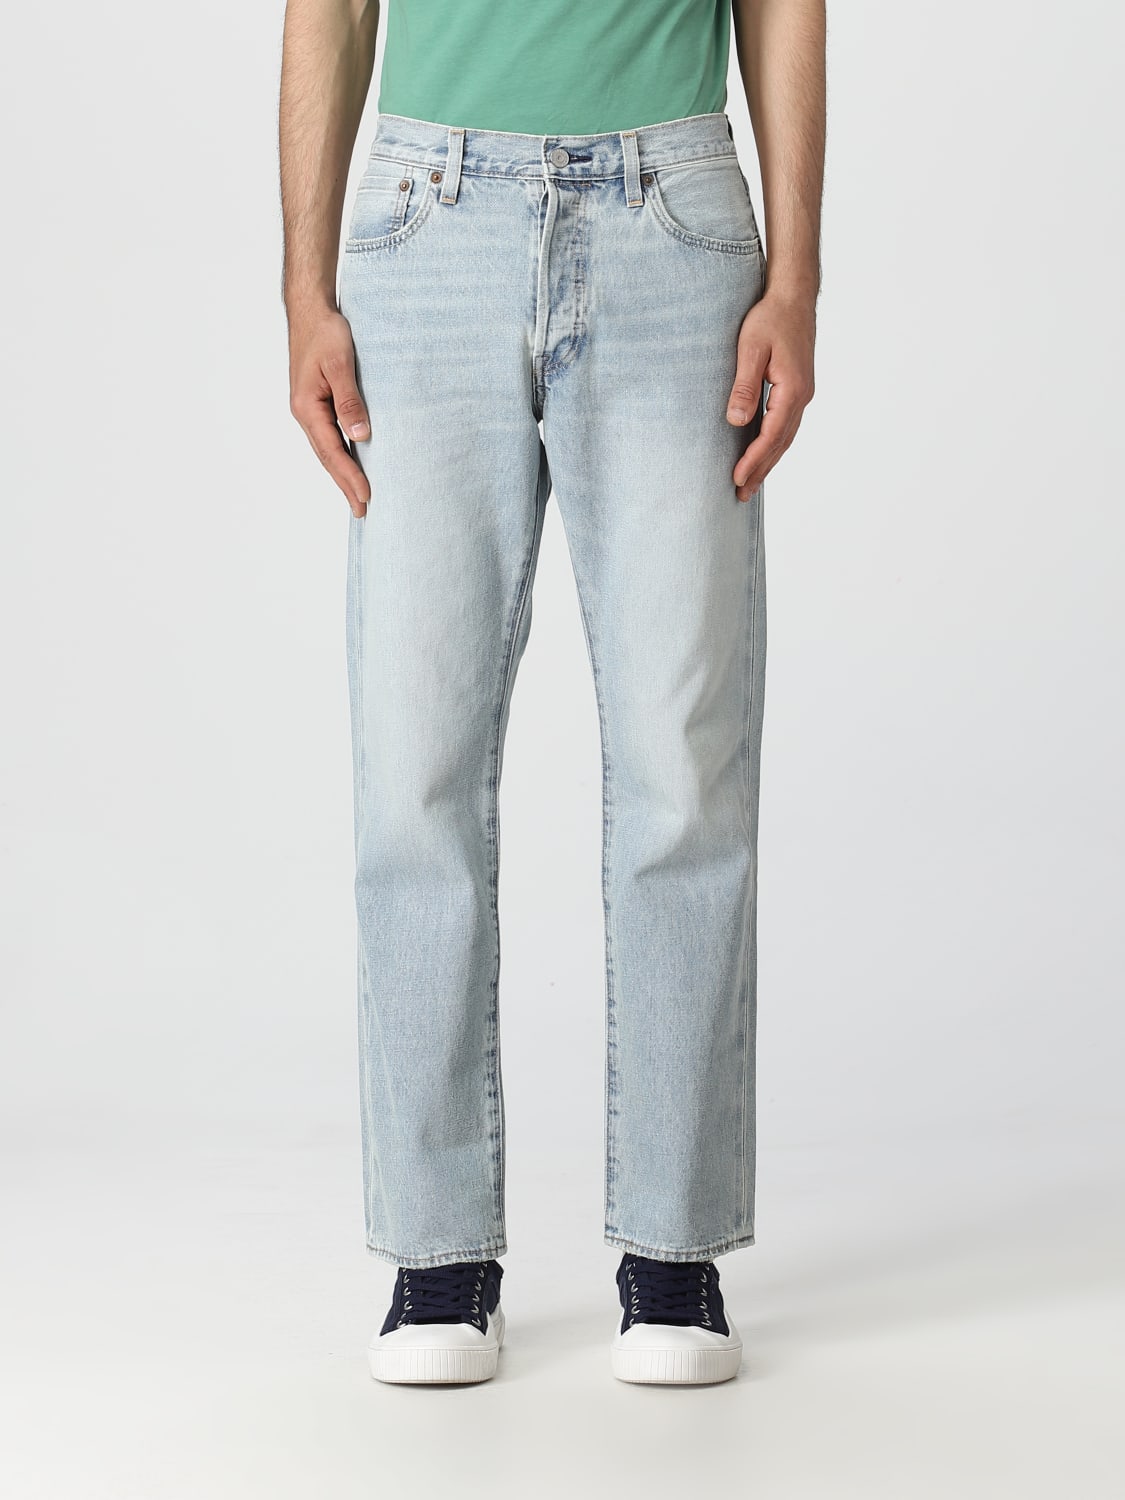 LEVI'S: jeans for man - | jeans 005013398 online at